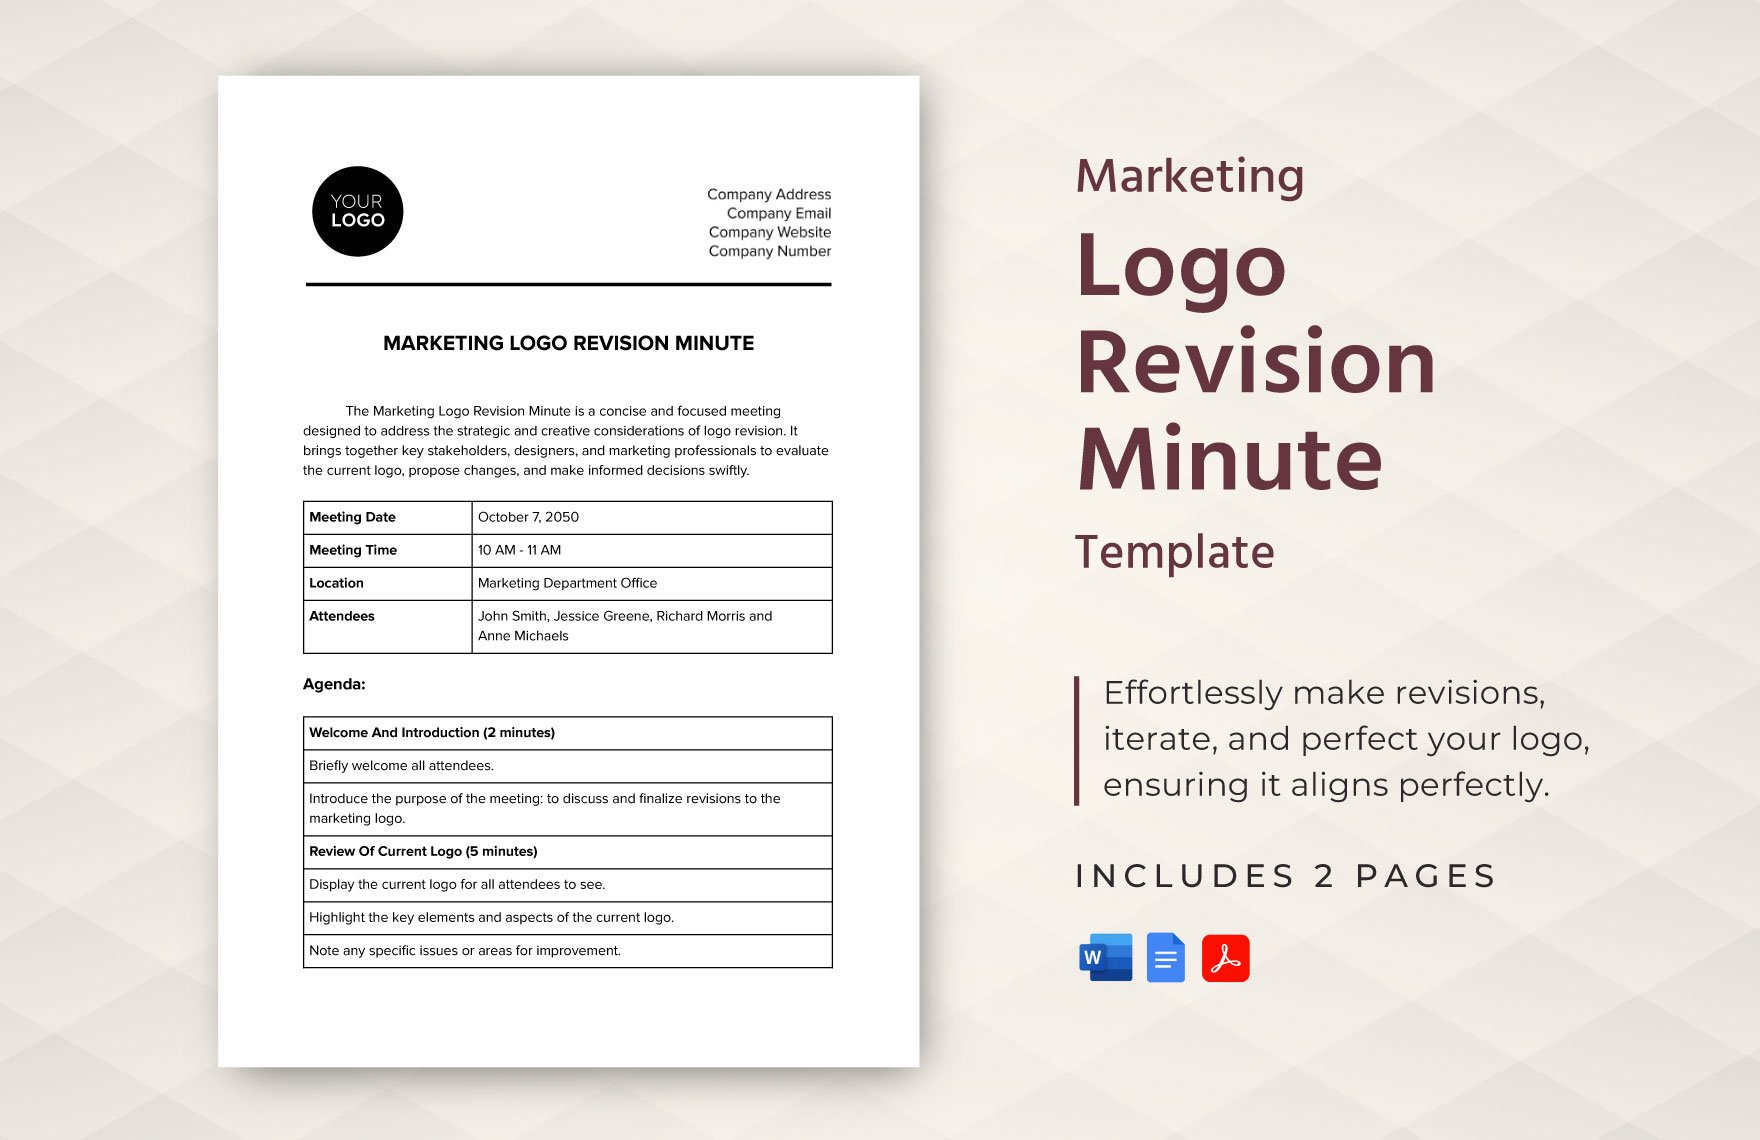 Marketing Logo Revision Minute Template